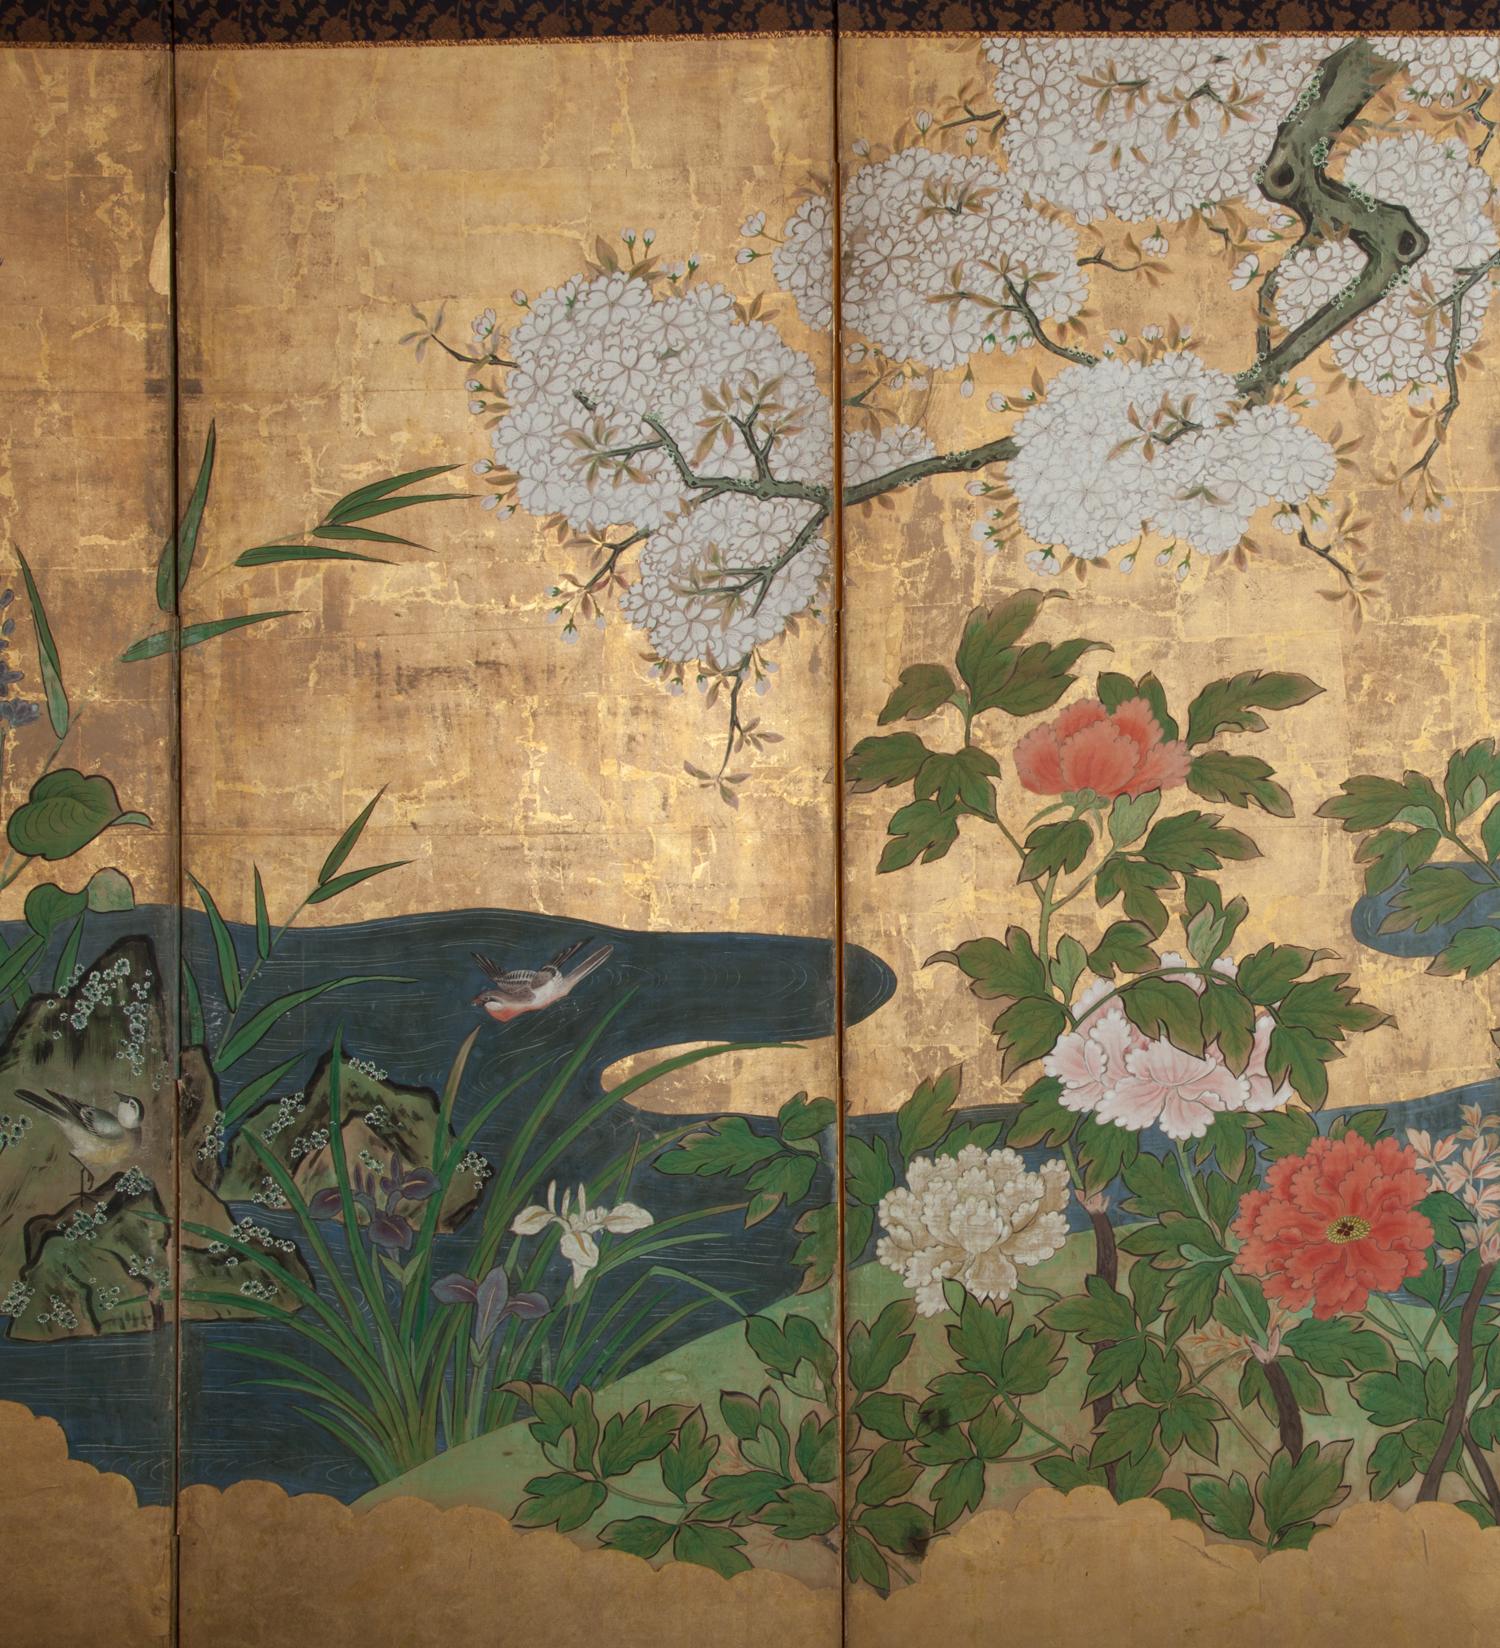 Kano School painting of spring landscape on a river bed, with irises, peonies, lilies, young bamboo and small birds. Mineral pigments and heavy gold leaf on mulberry paper with silk brocade border.